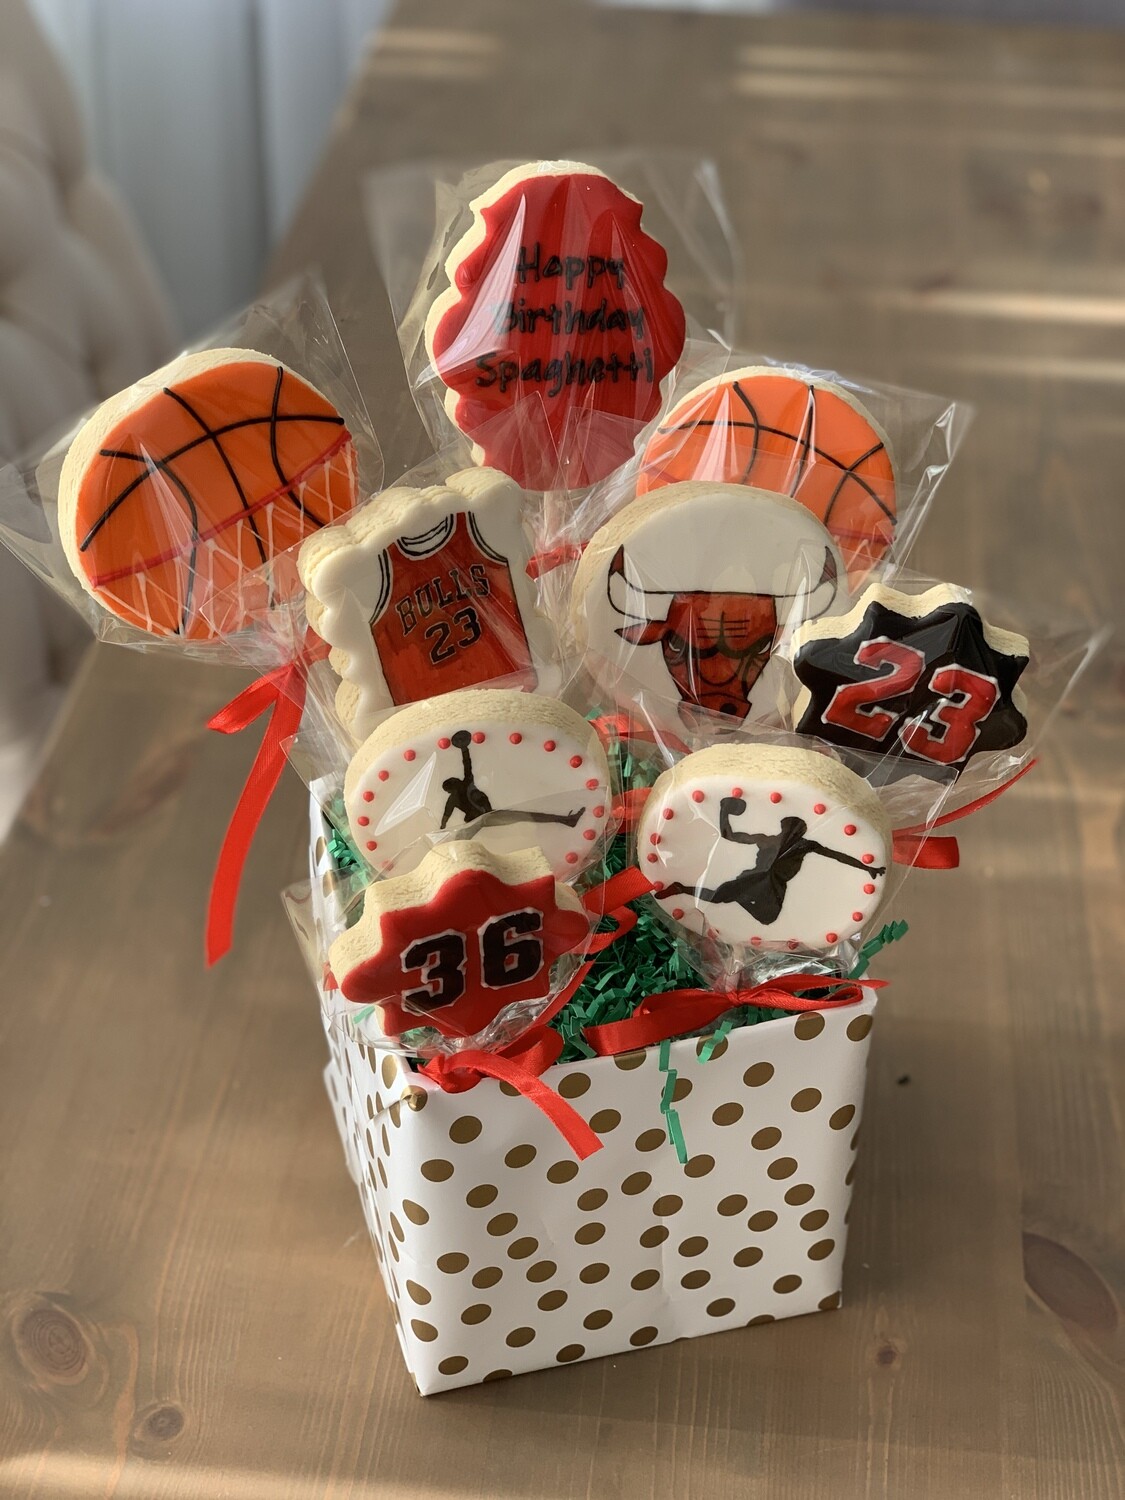 "Themed" Gift Baskets: You pick the theme